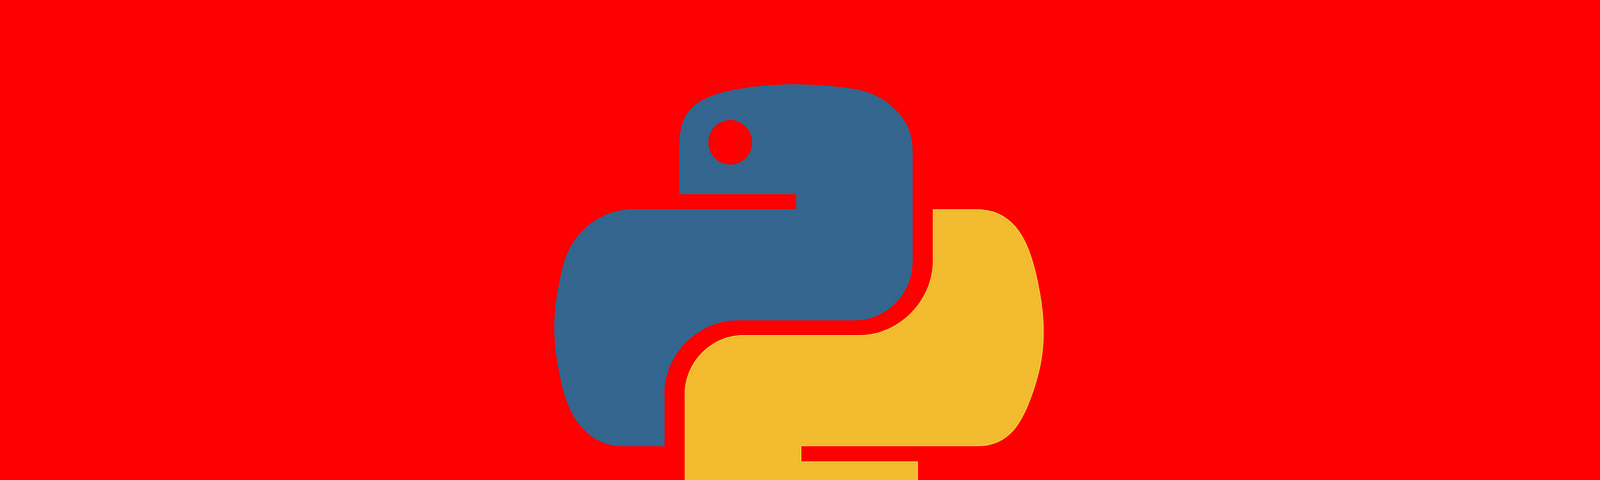 python logo on a red background